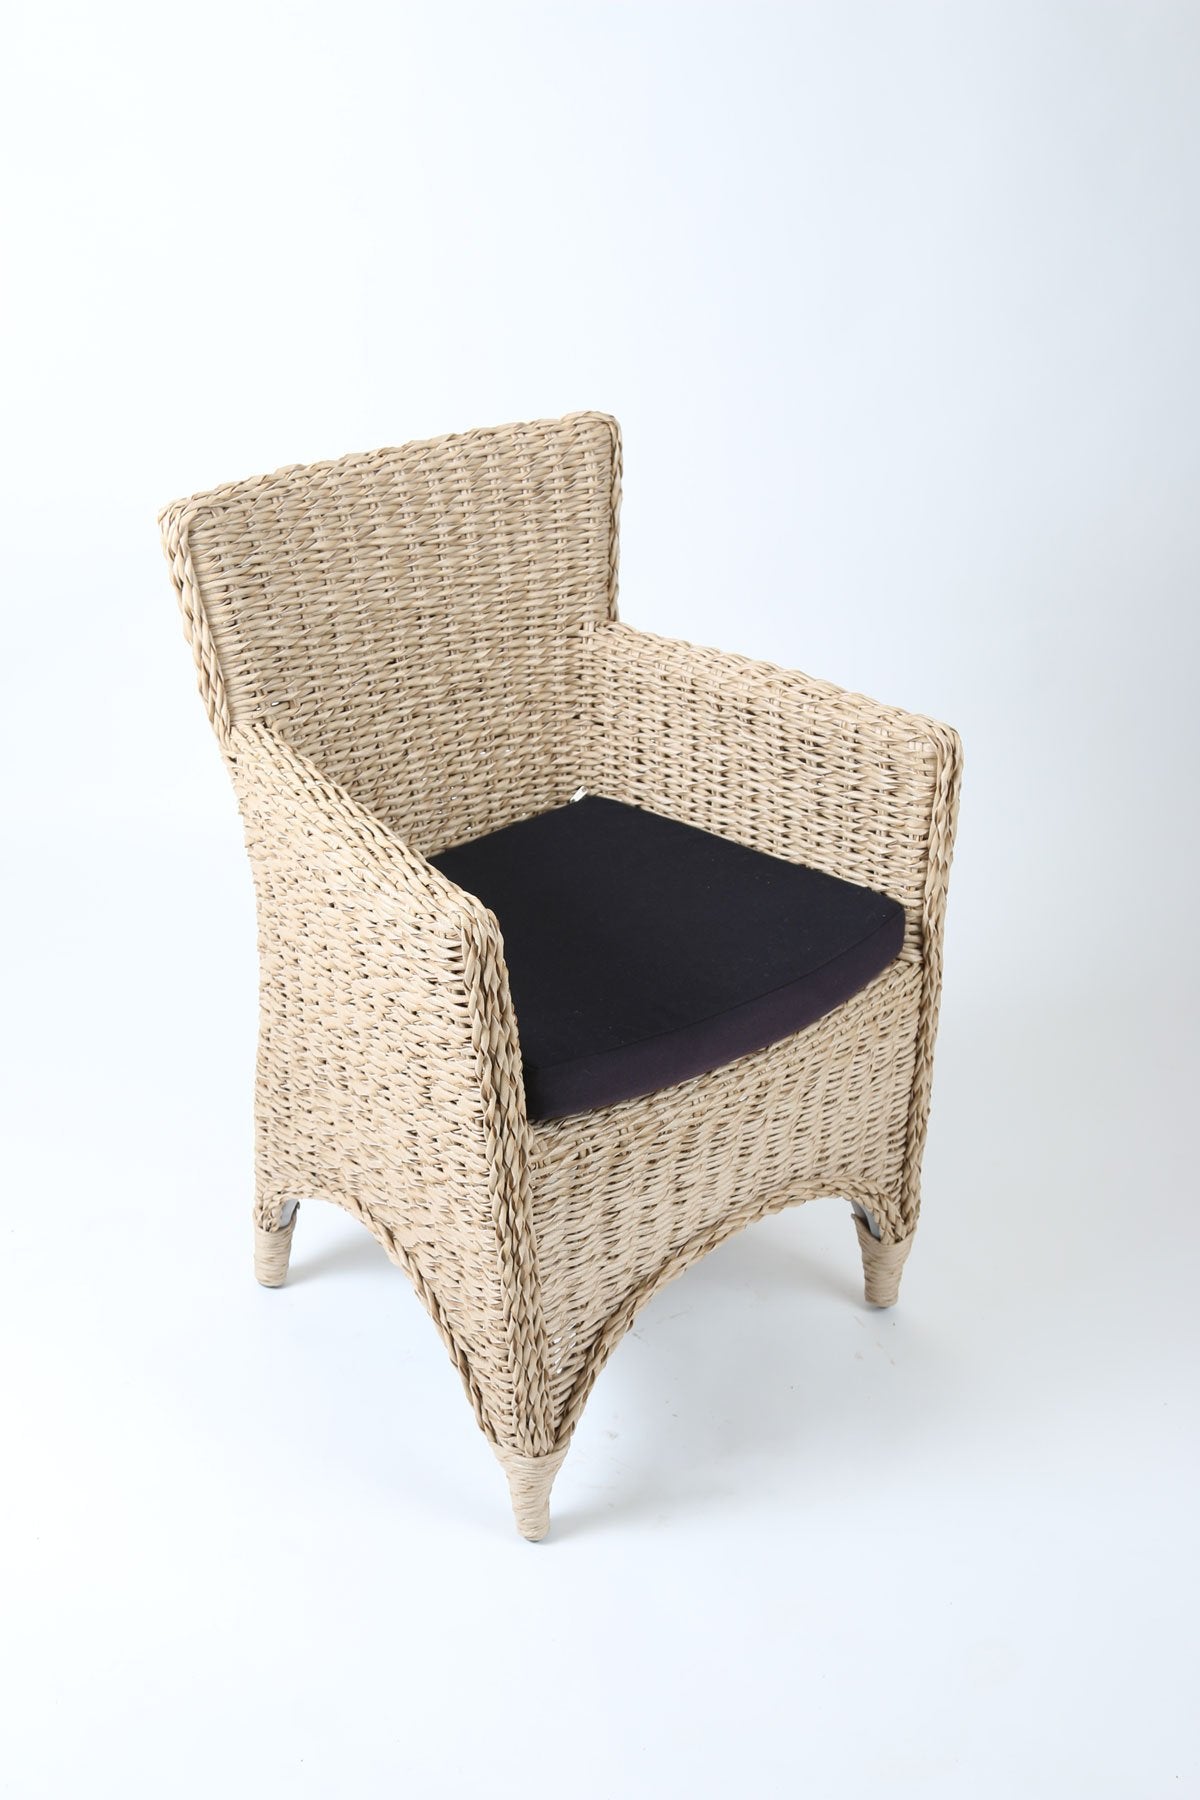 Light Honey Twisted Wicker Chair with Black Cushion